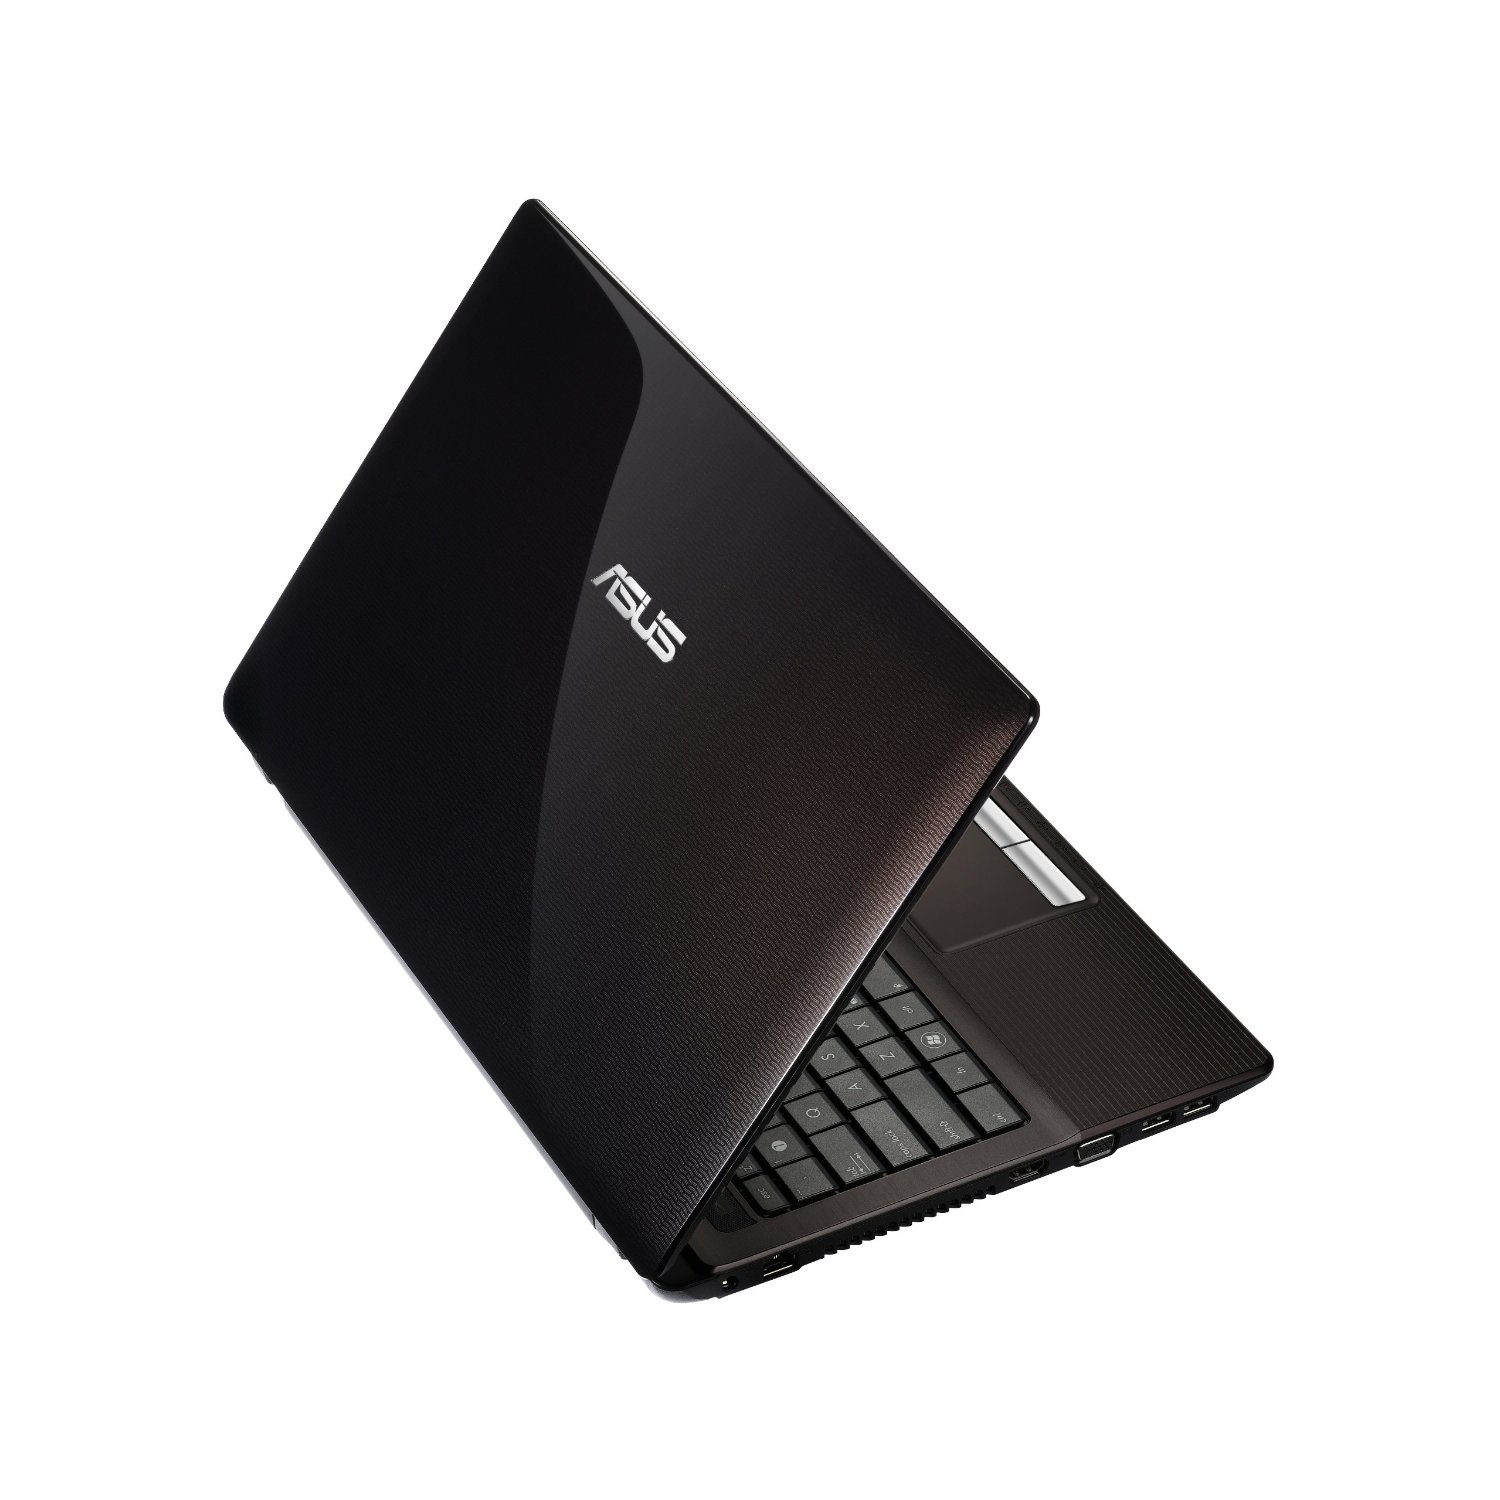 http://thetechjournal.com/wp-content/uploads/images/1203/1332652603-asus-a53ues01-156inch-laptop-5.jpg